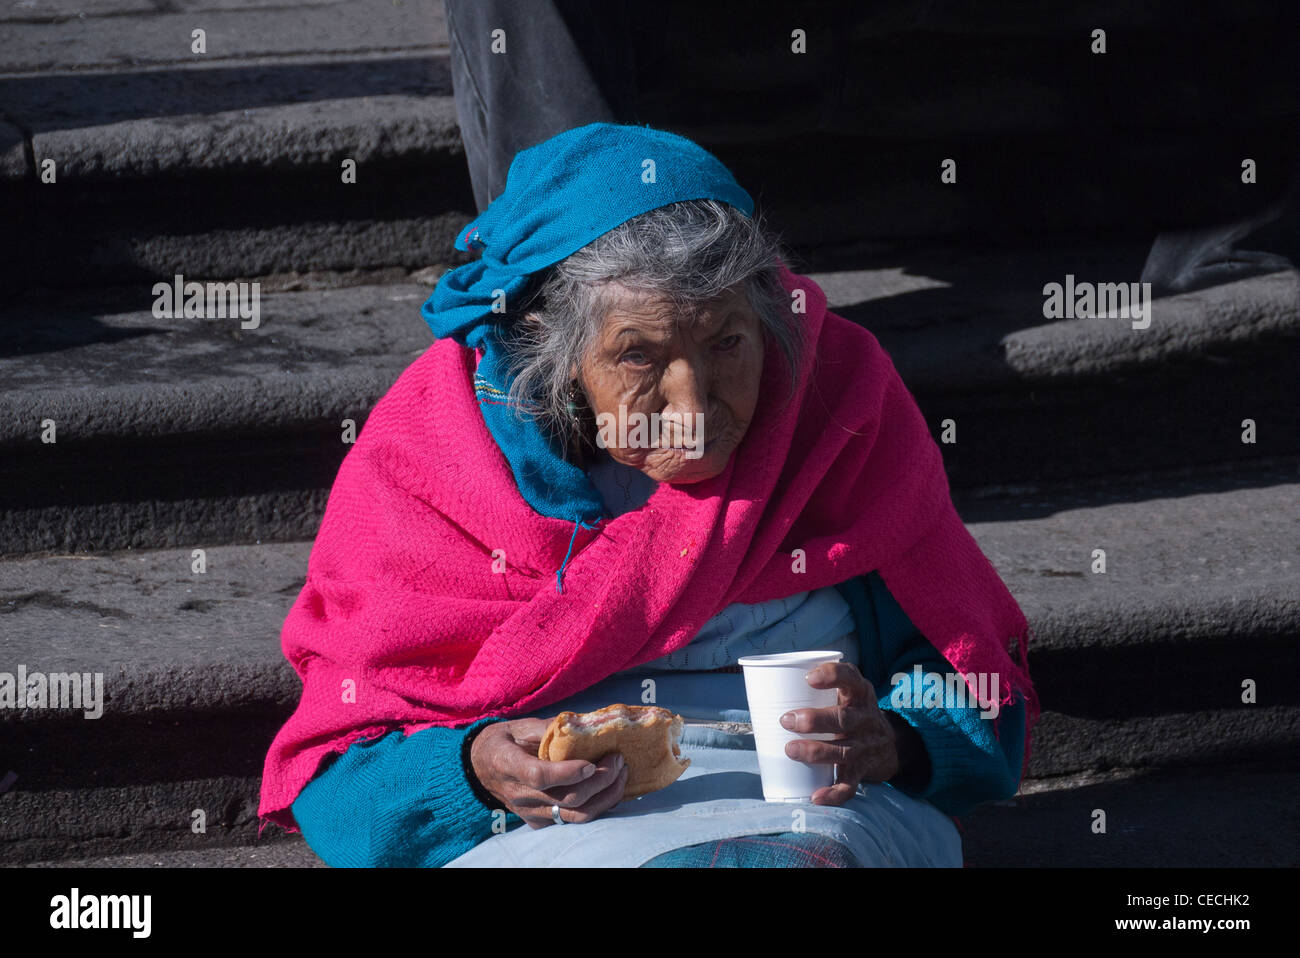 An 80-90 year old, Ecuadorian indigenous woman sits on steps in San Francisco Plaza eating free food from a community kitchen. Stock Photo